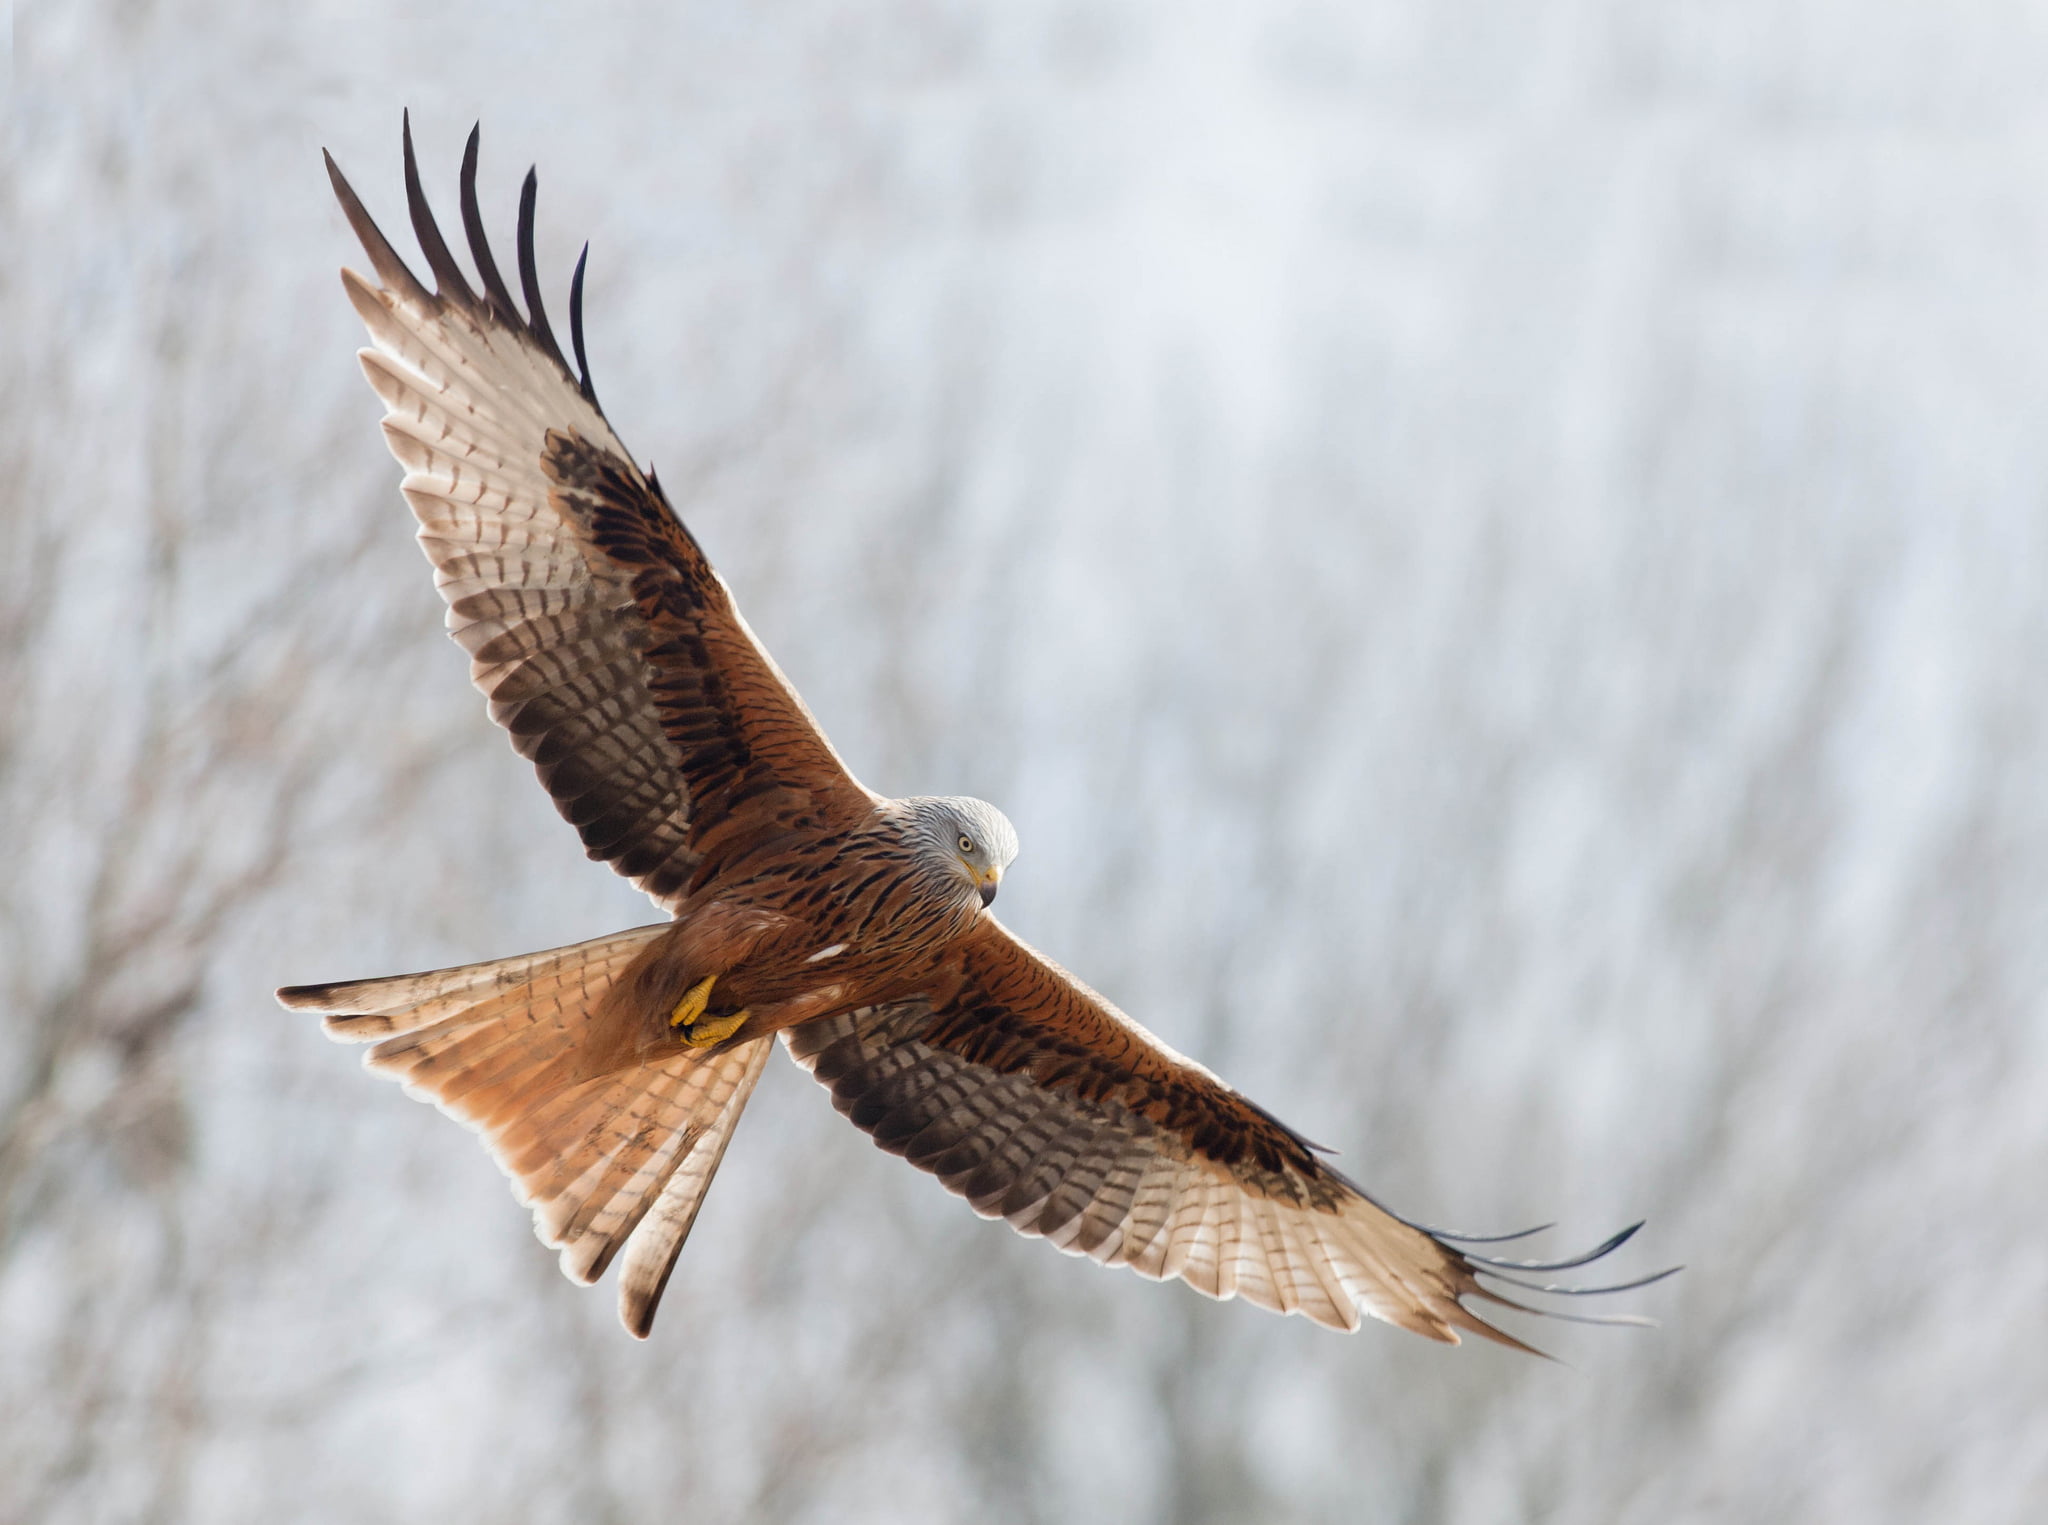 white and brown eagle, freedom, flight, bird, wings, stroke, Red kite